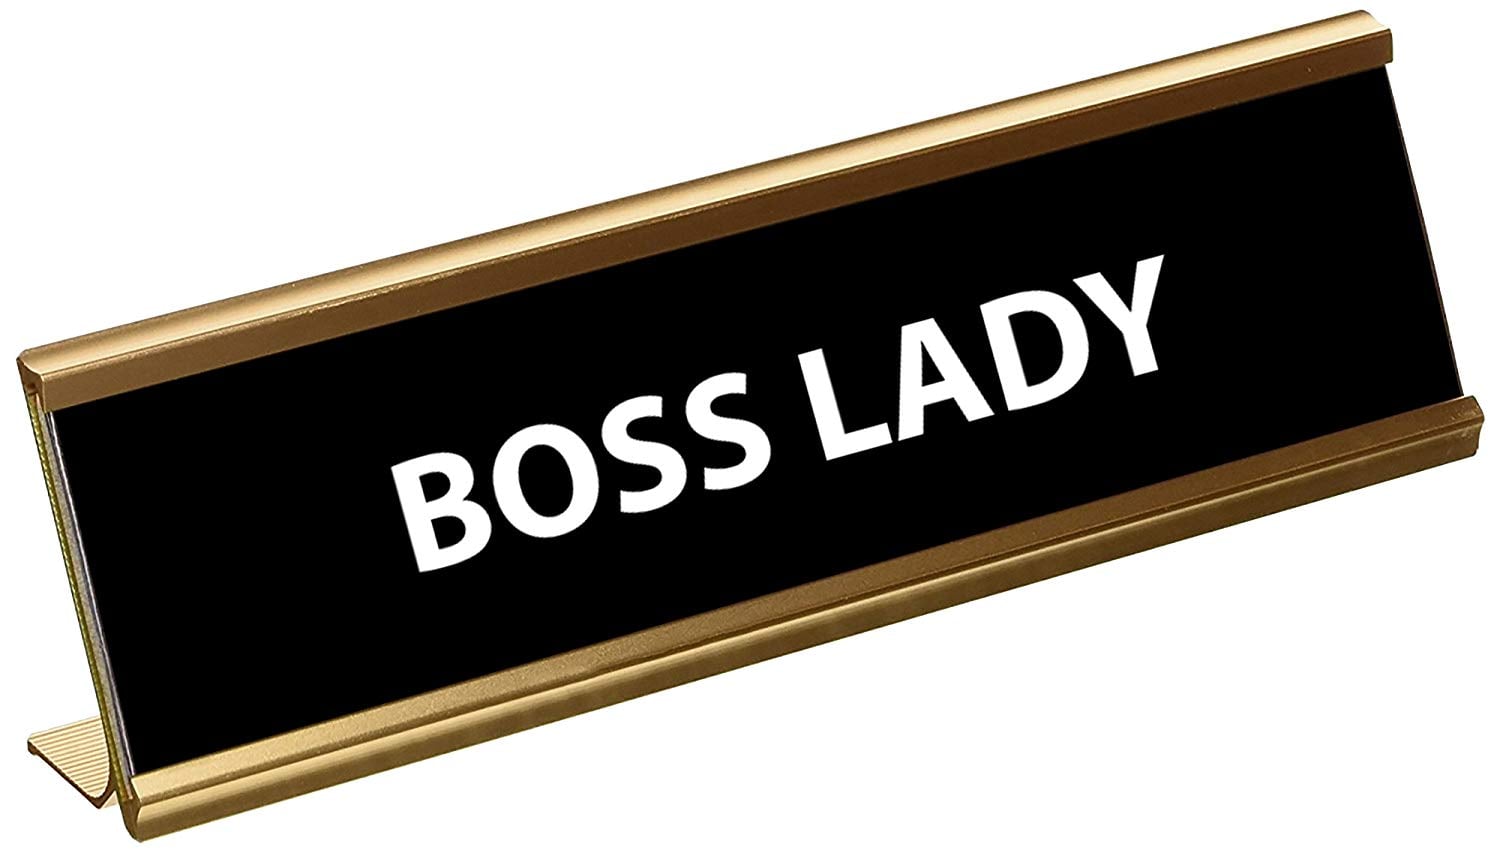 Funny Boss Lady Engraved Desk Plaque 25 Genius Gifts For Your